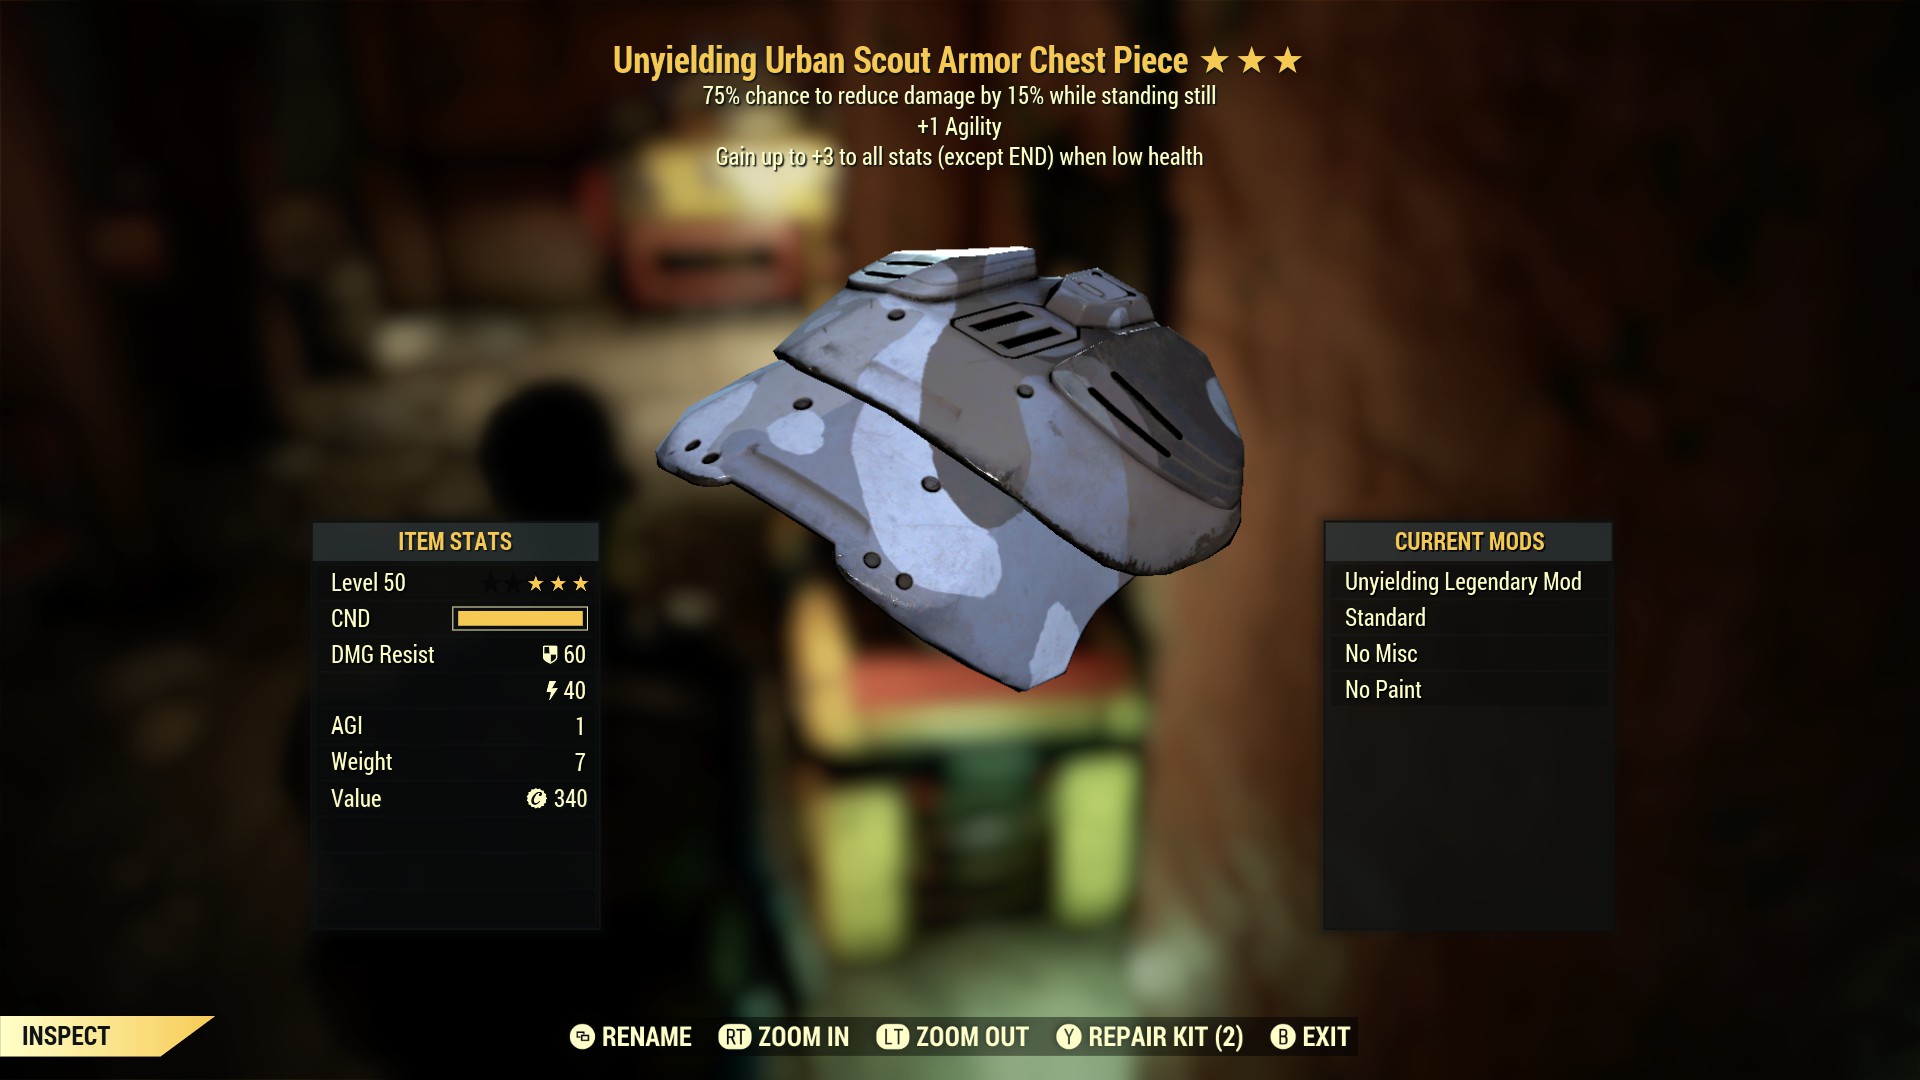 Unyielding Urban Scout Armor Chest Piece